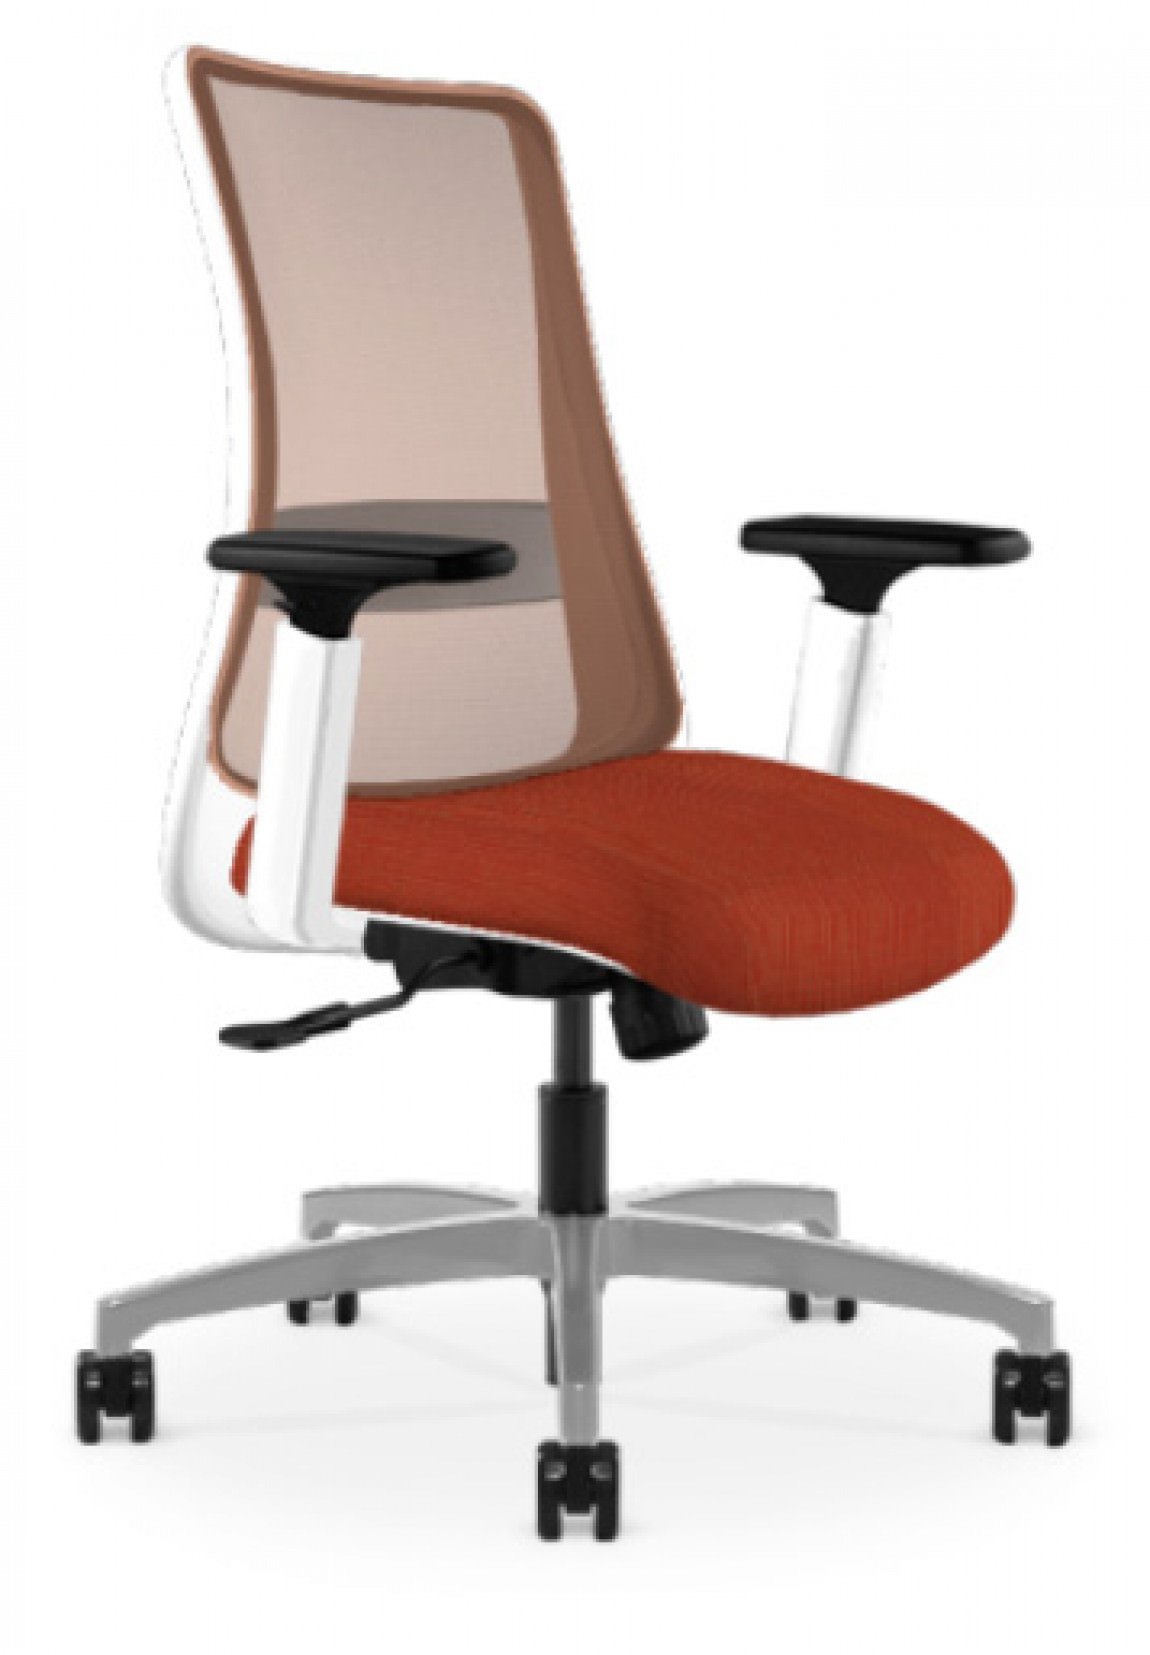 Genie Copper Mesh Antimicrobial Office Chair with Lumbar Support